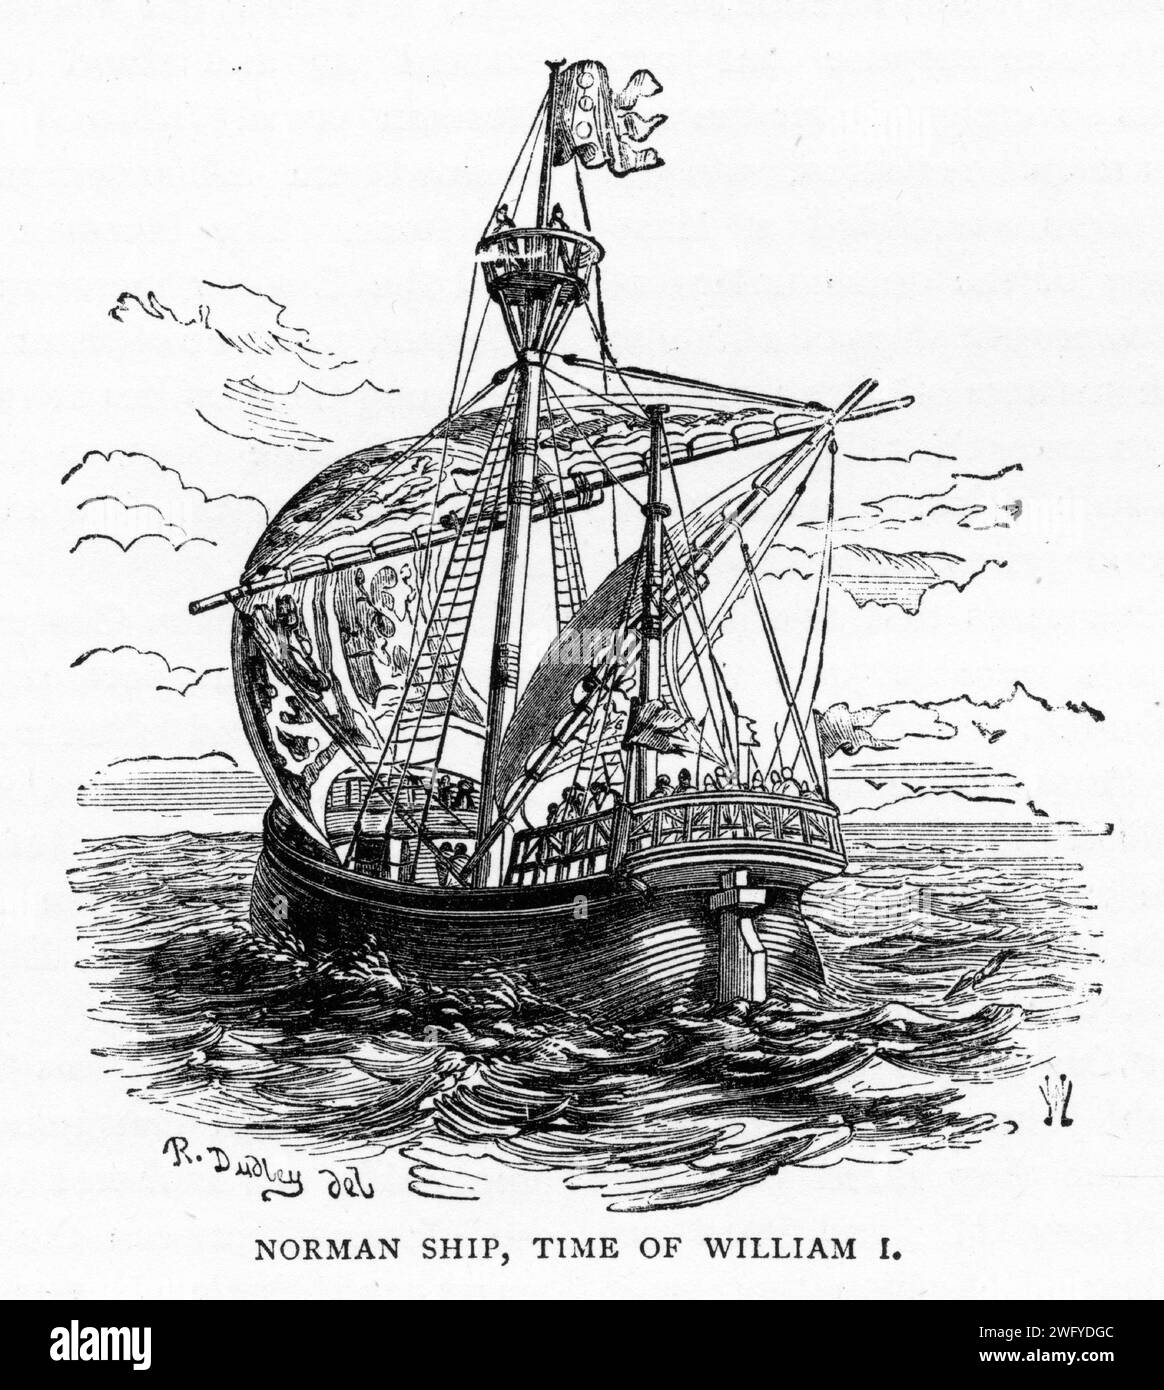 Engraving of a Norman ship at the time of William I, published circa 1900 Stock Photo